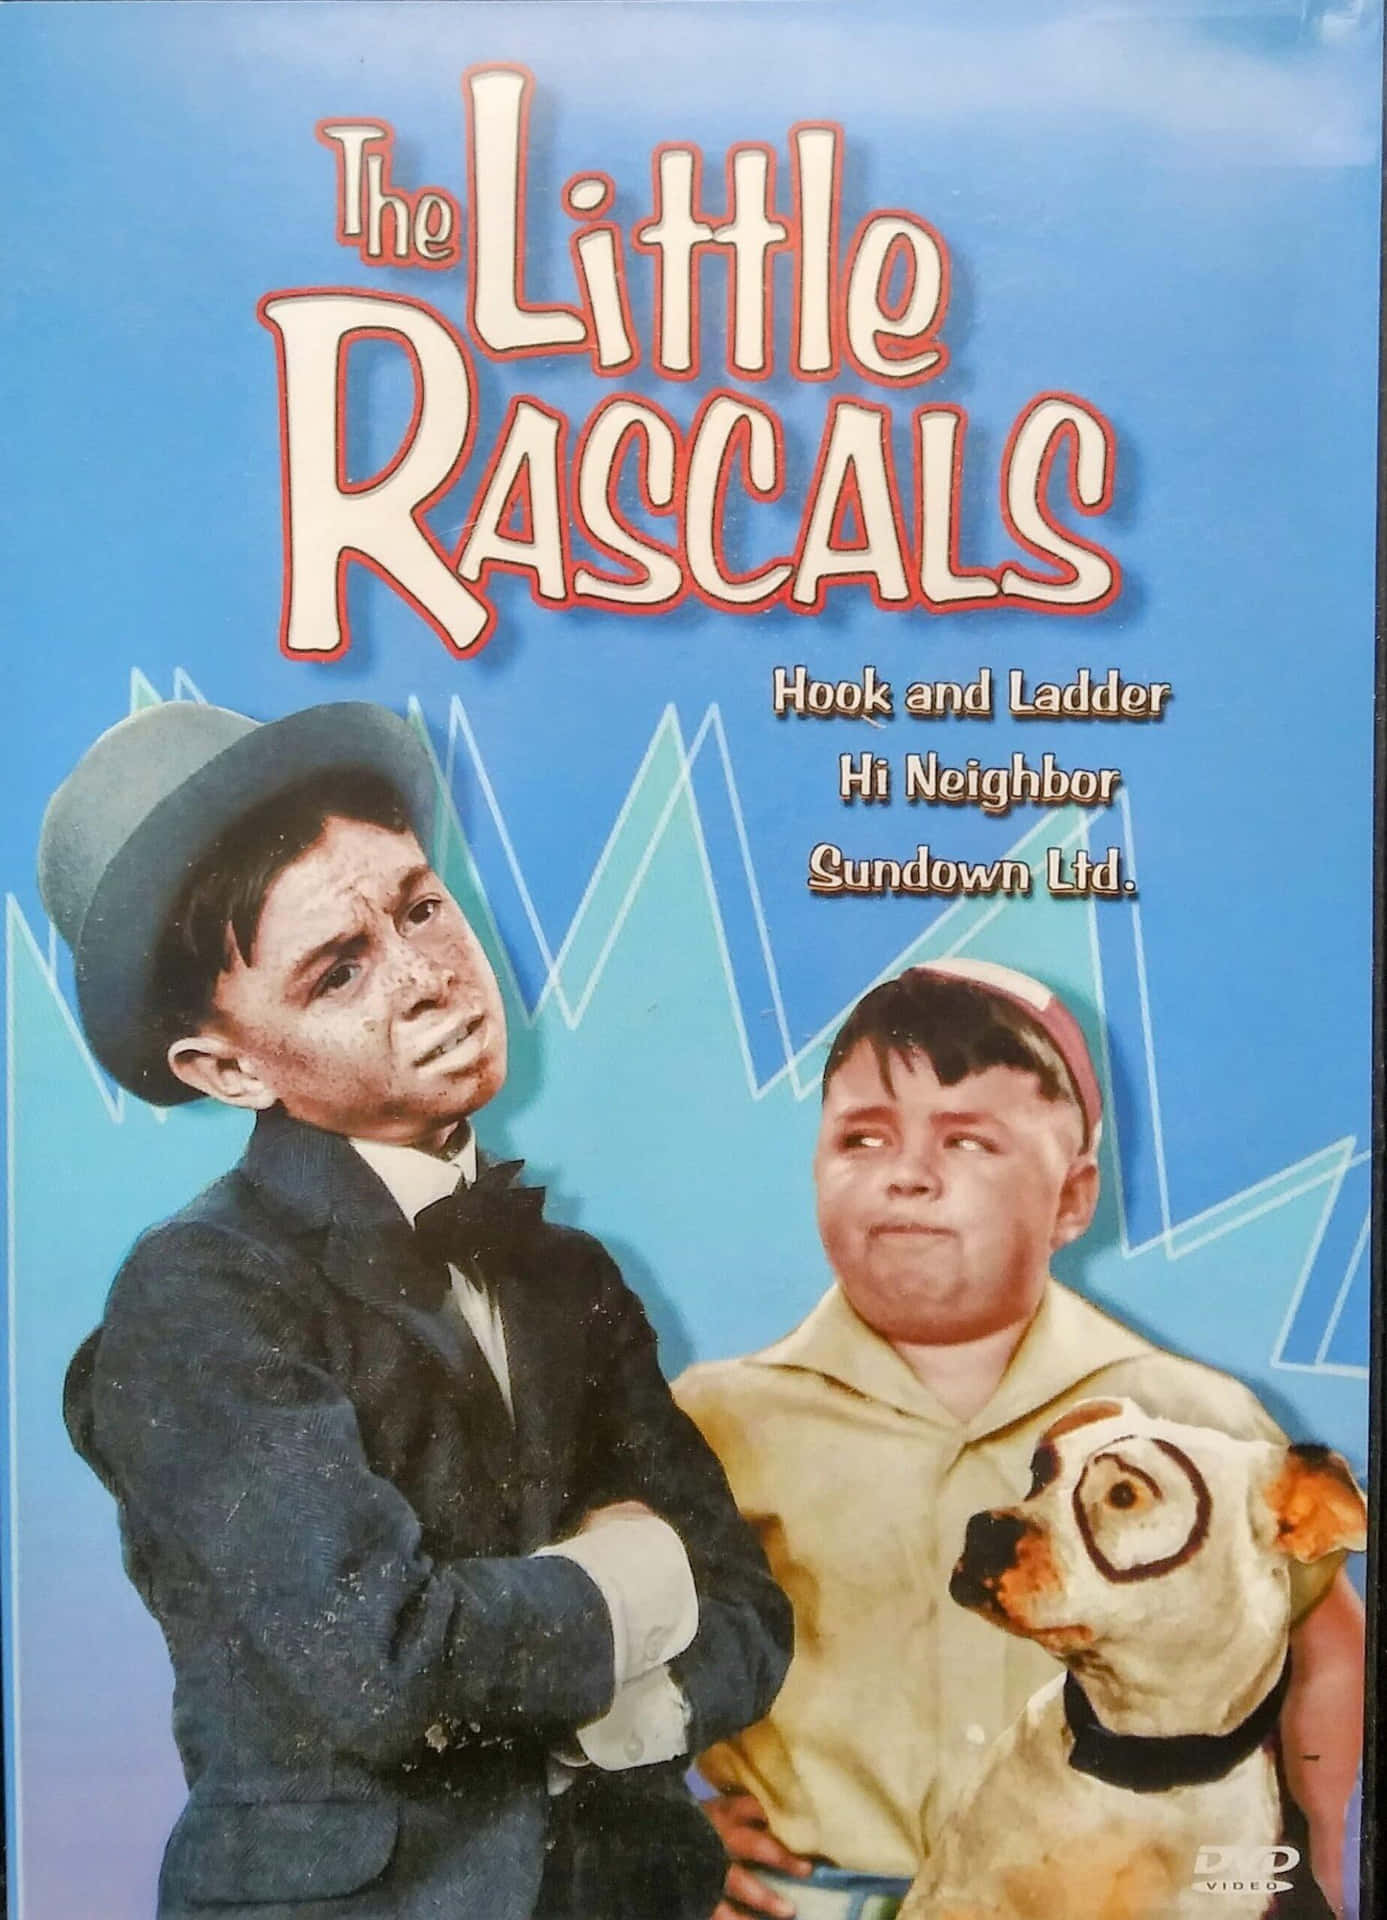 “The Little Rascals in all their mischief!”